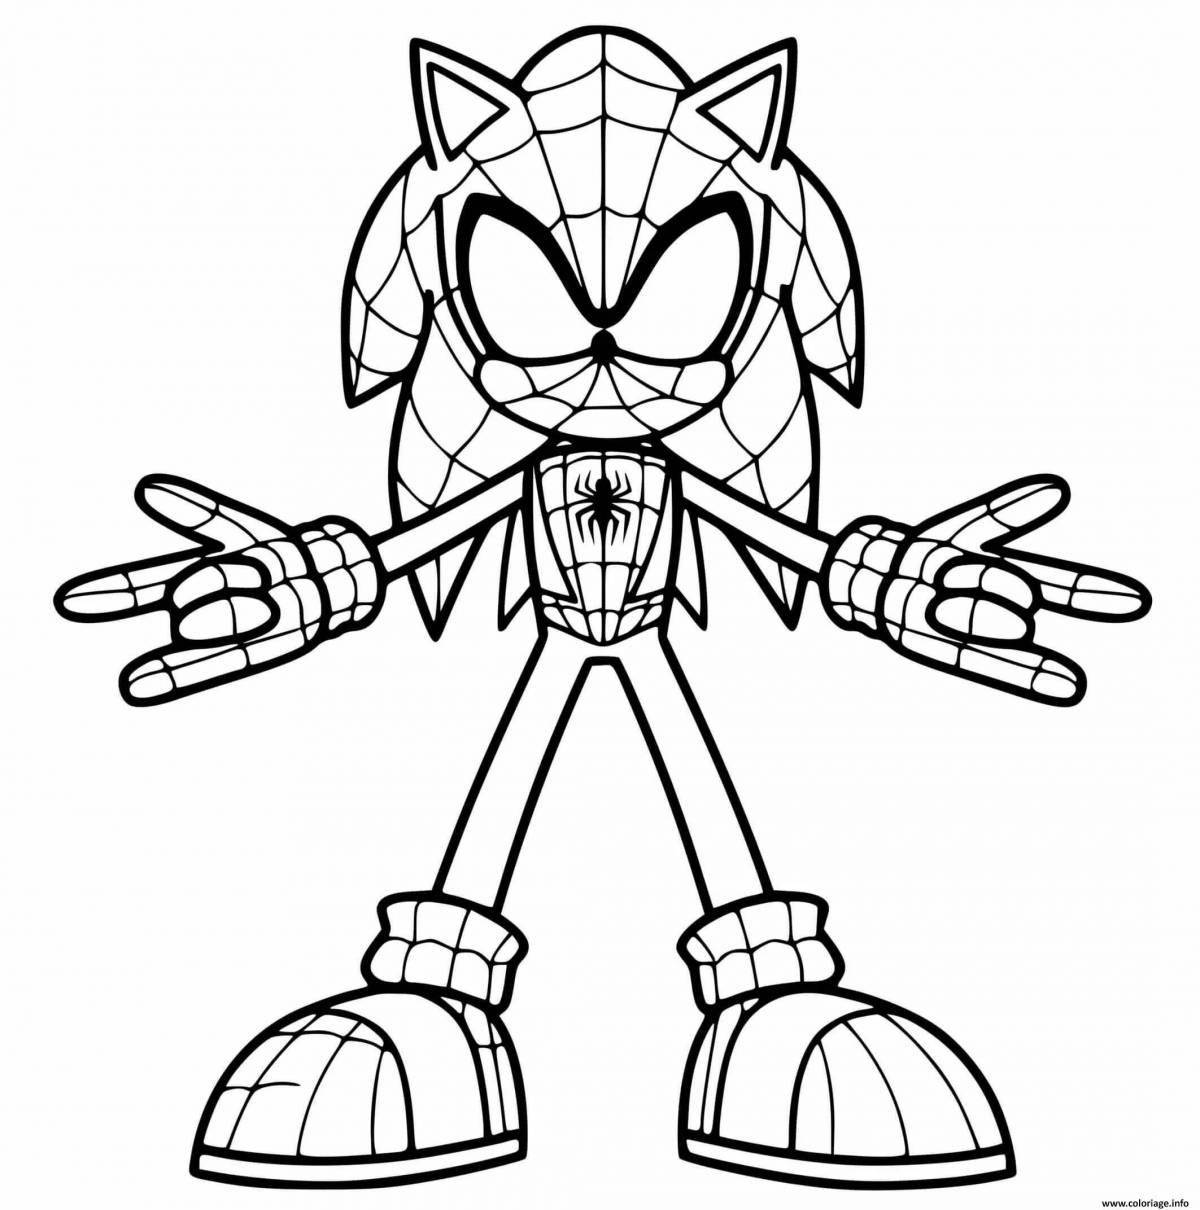 Intriguing sonic shredder coloring book